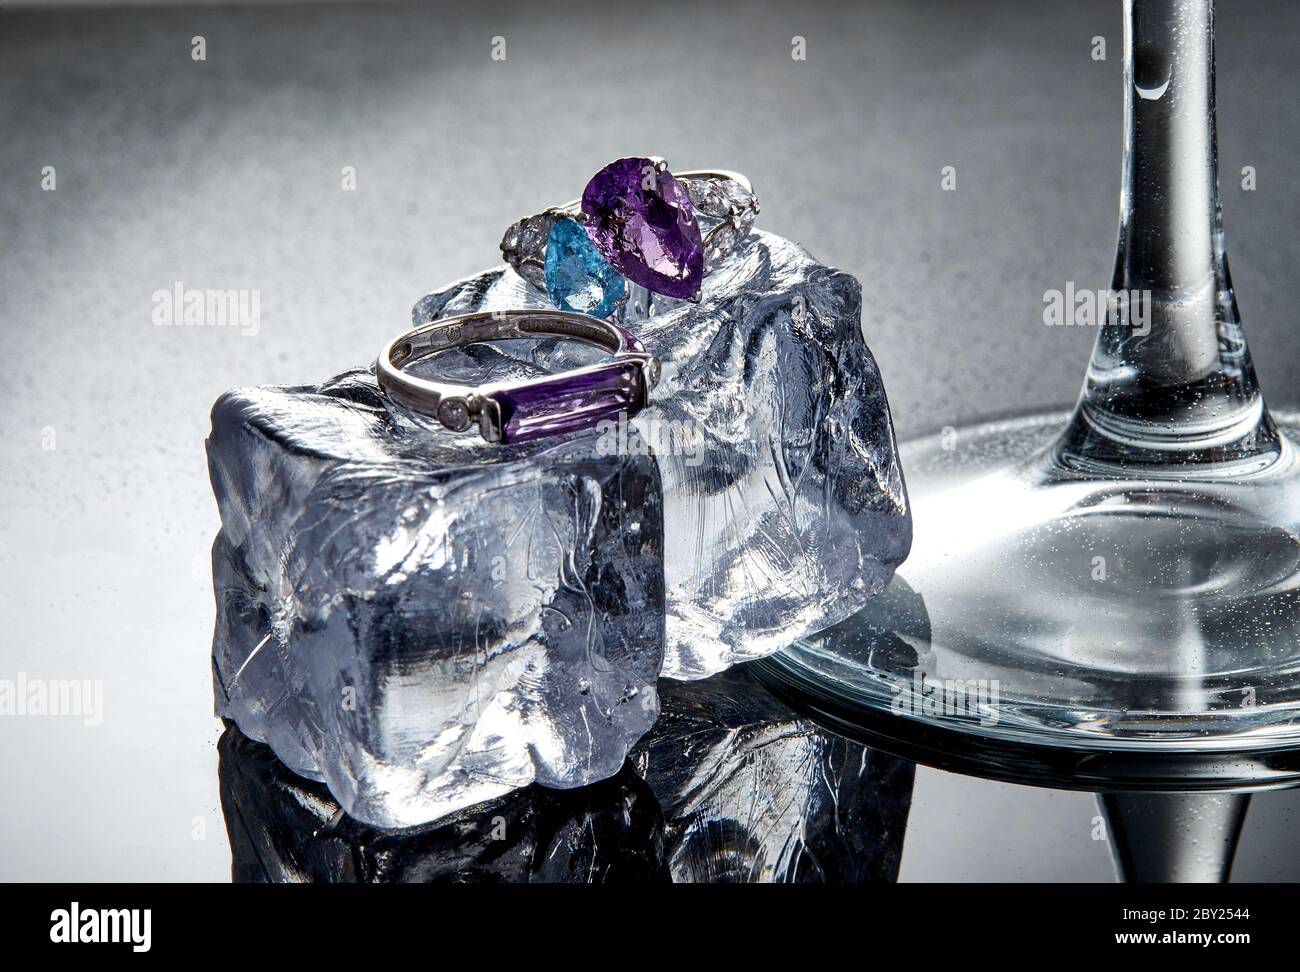 White gold rings with amethyst and blue topaz on ice cubes on a gray  background with reflection. Jewelry art and product sales Stock Photo -  Alamy